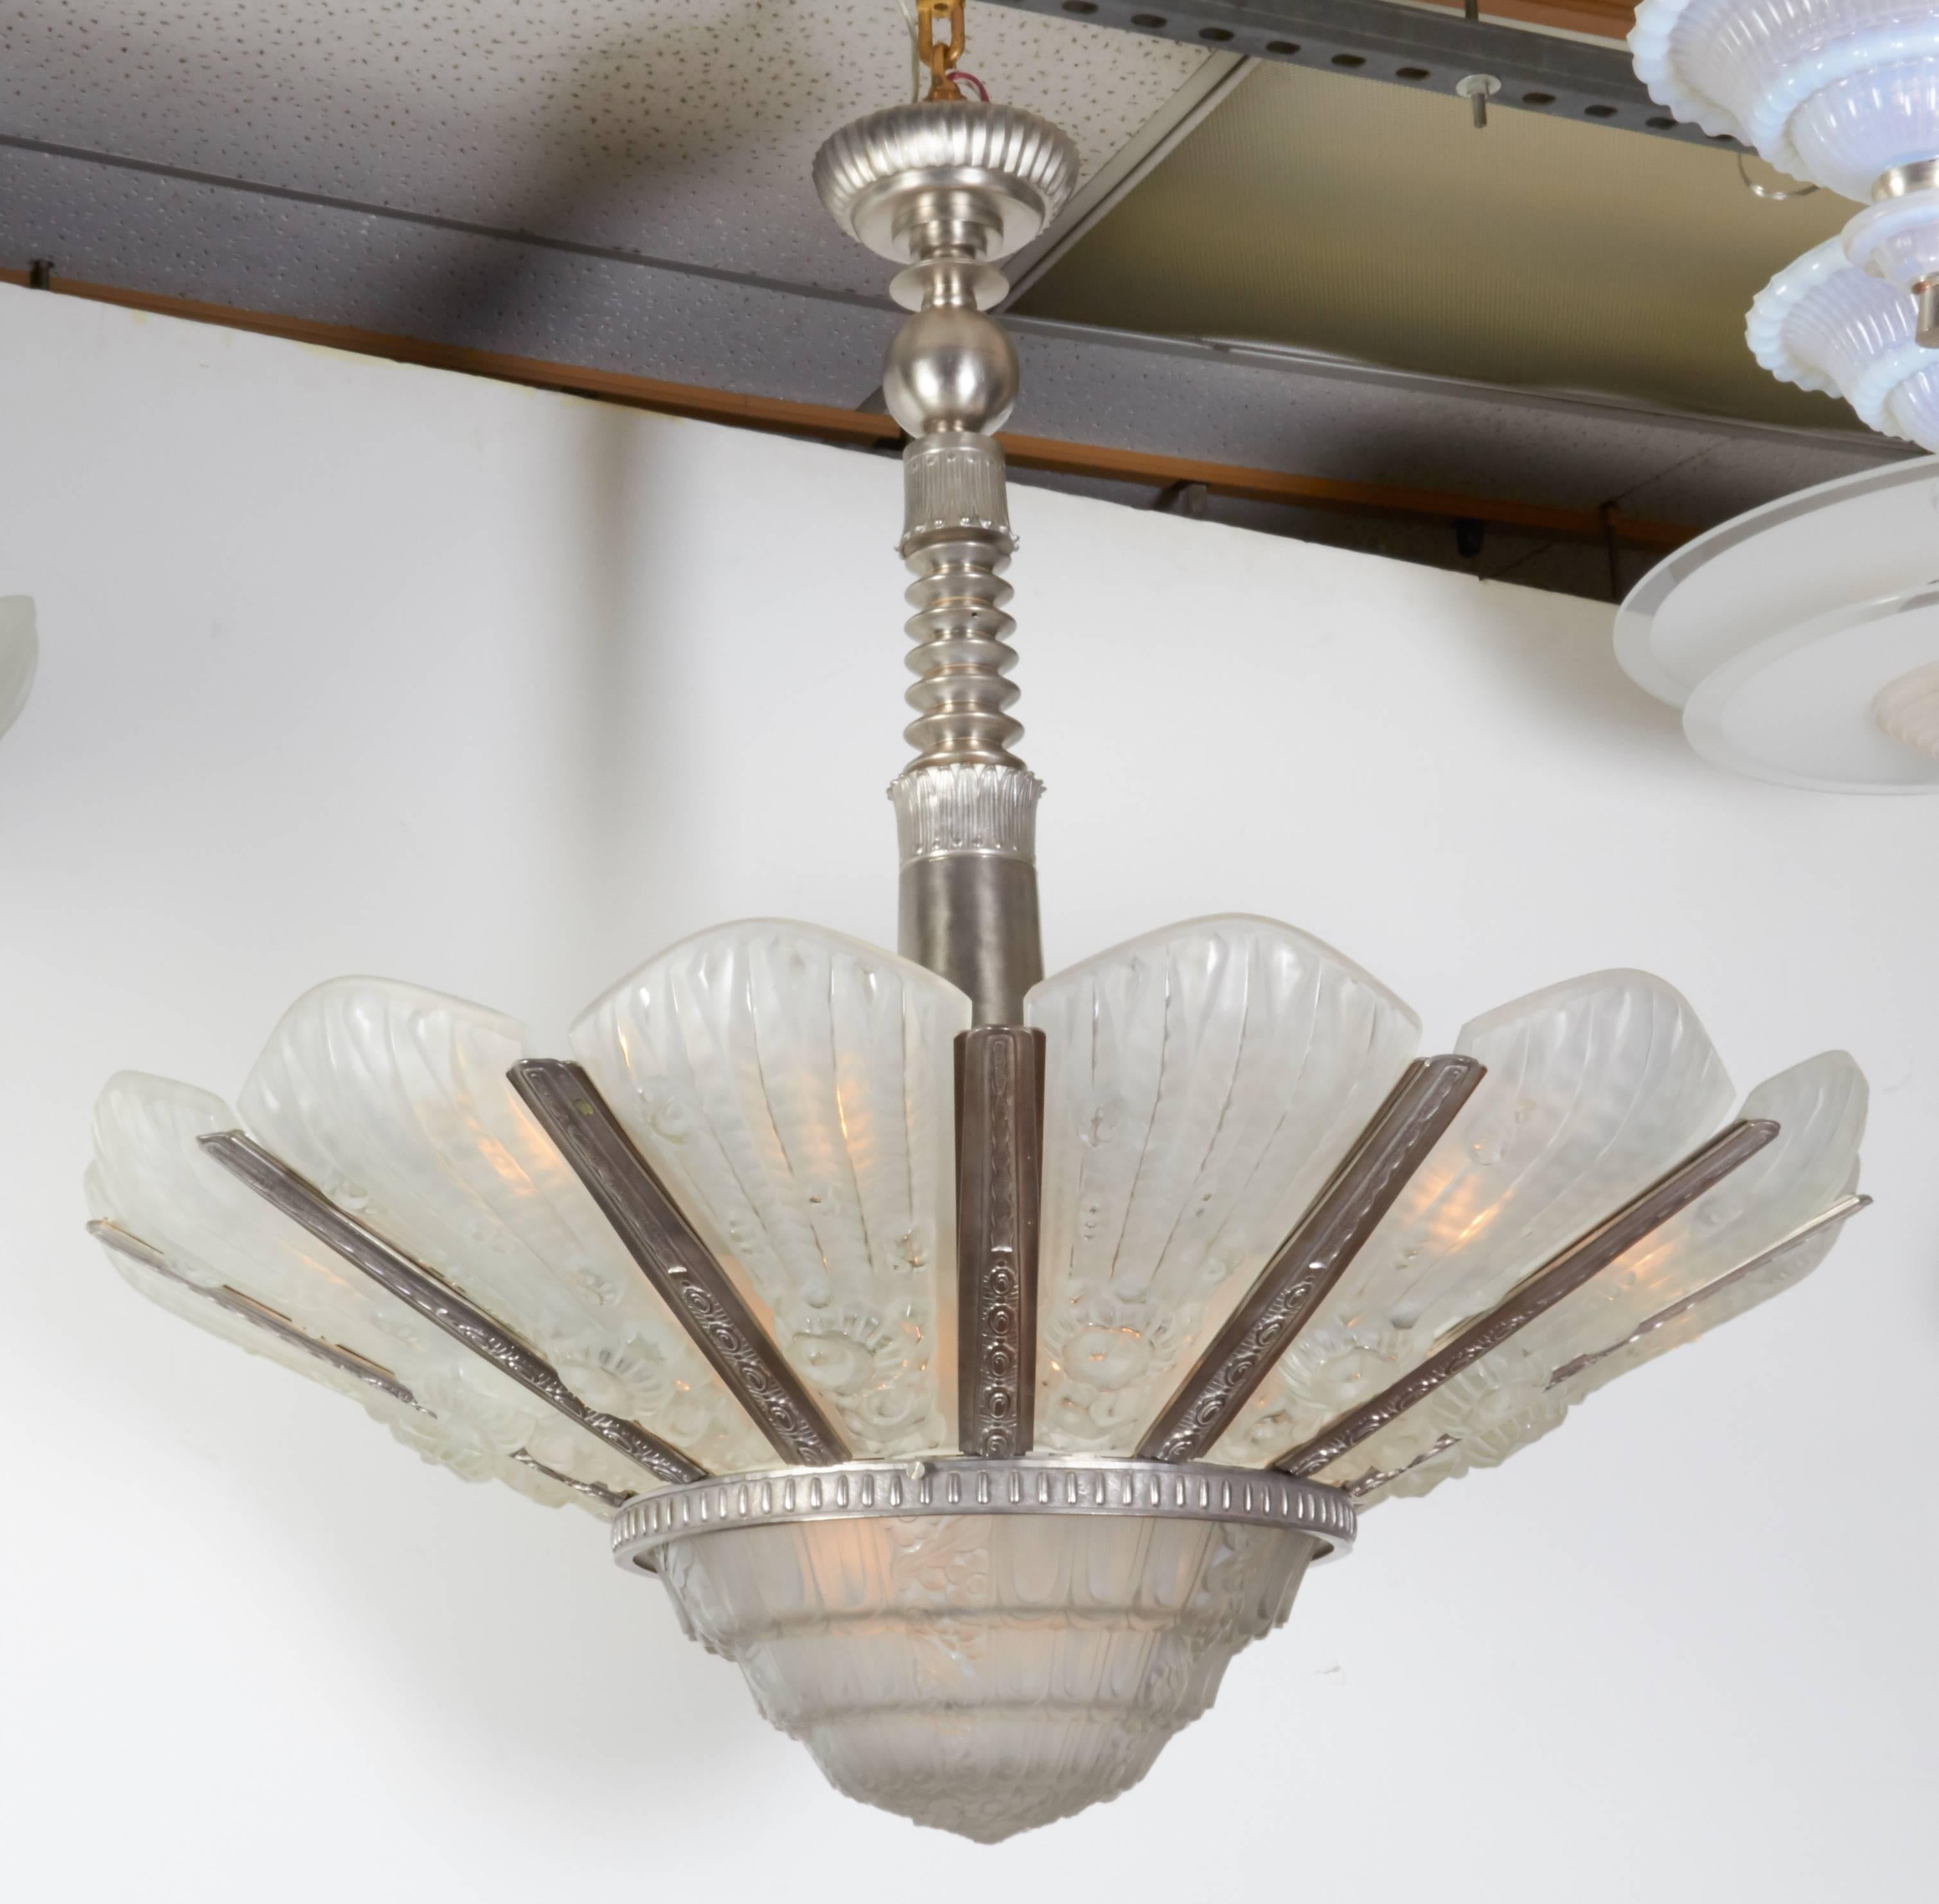 Important and massive French Art Deco sunburst chandelier by Genet et Michon comprising fourteen elongated and heavily molded frosted art glass panels culminating with a deep central coupe, all mounted in a fully detailed and finely machined,